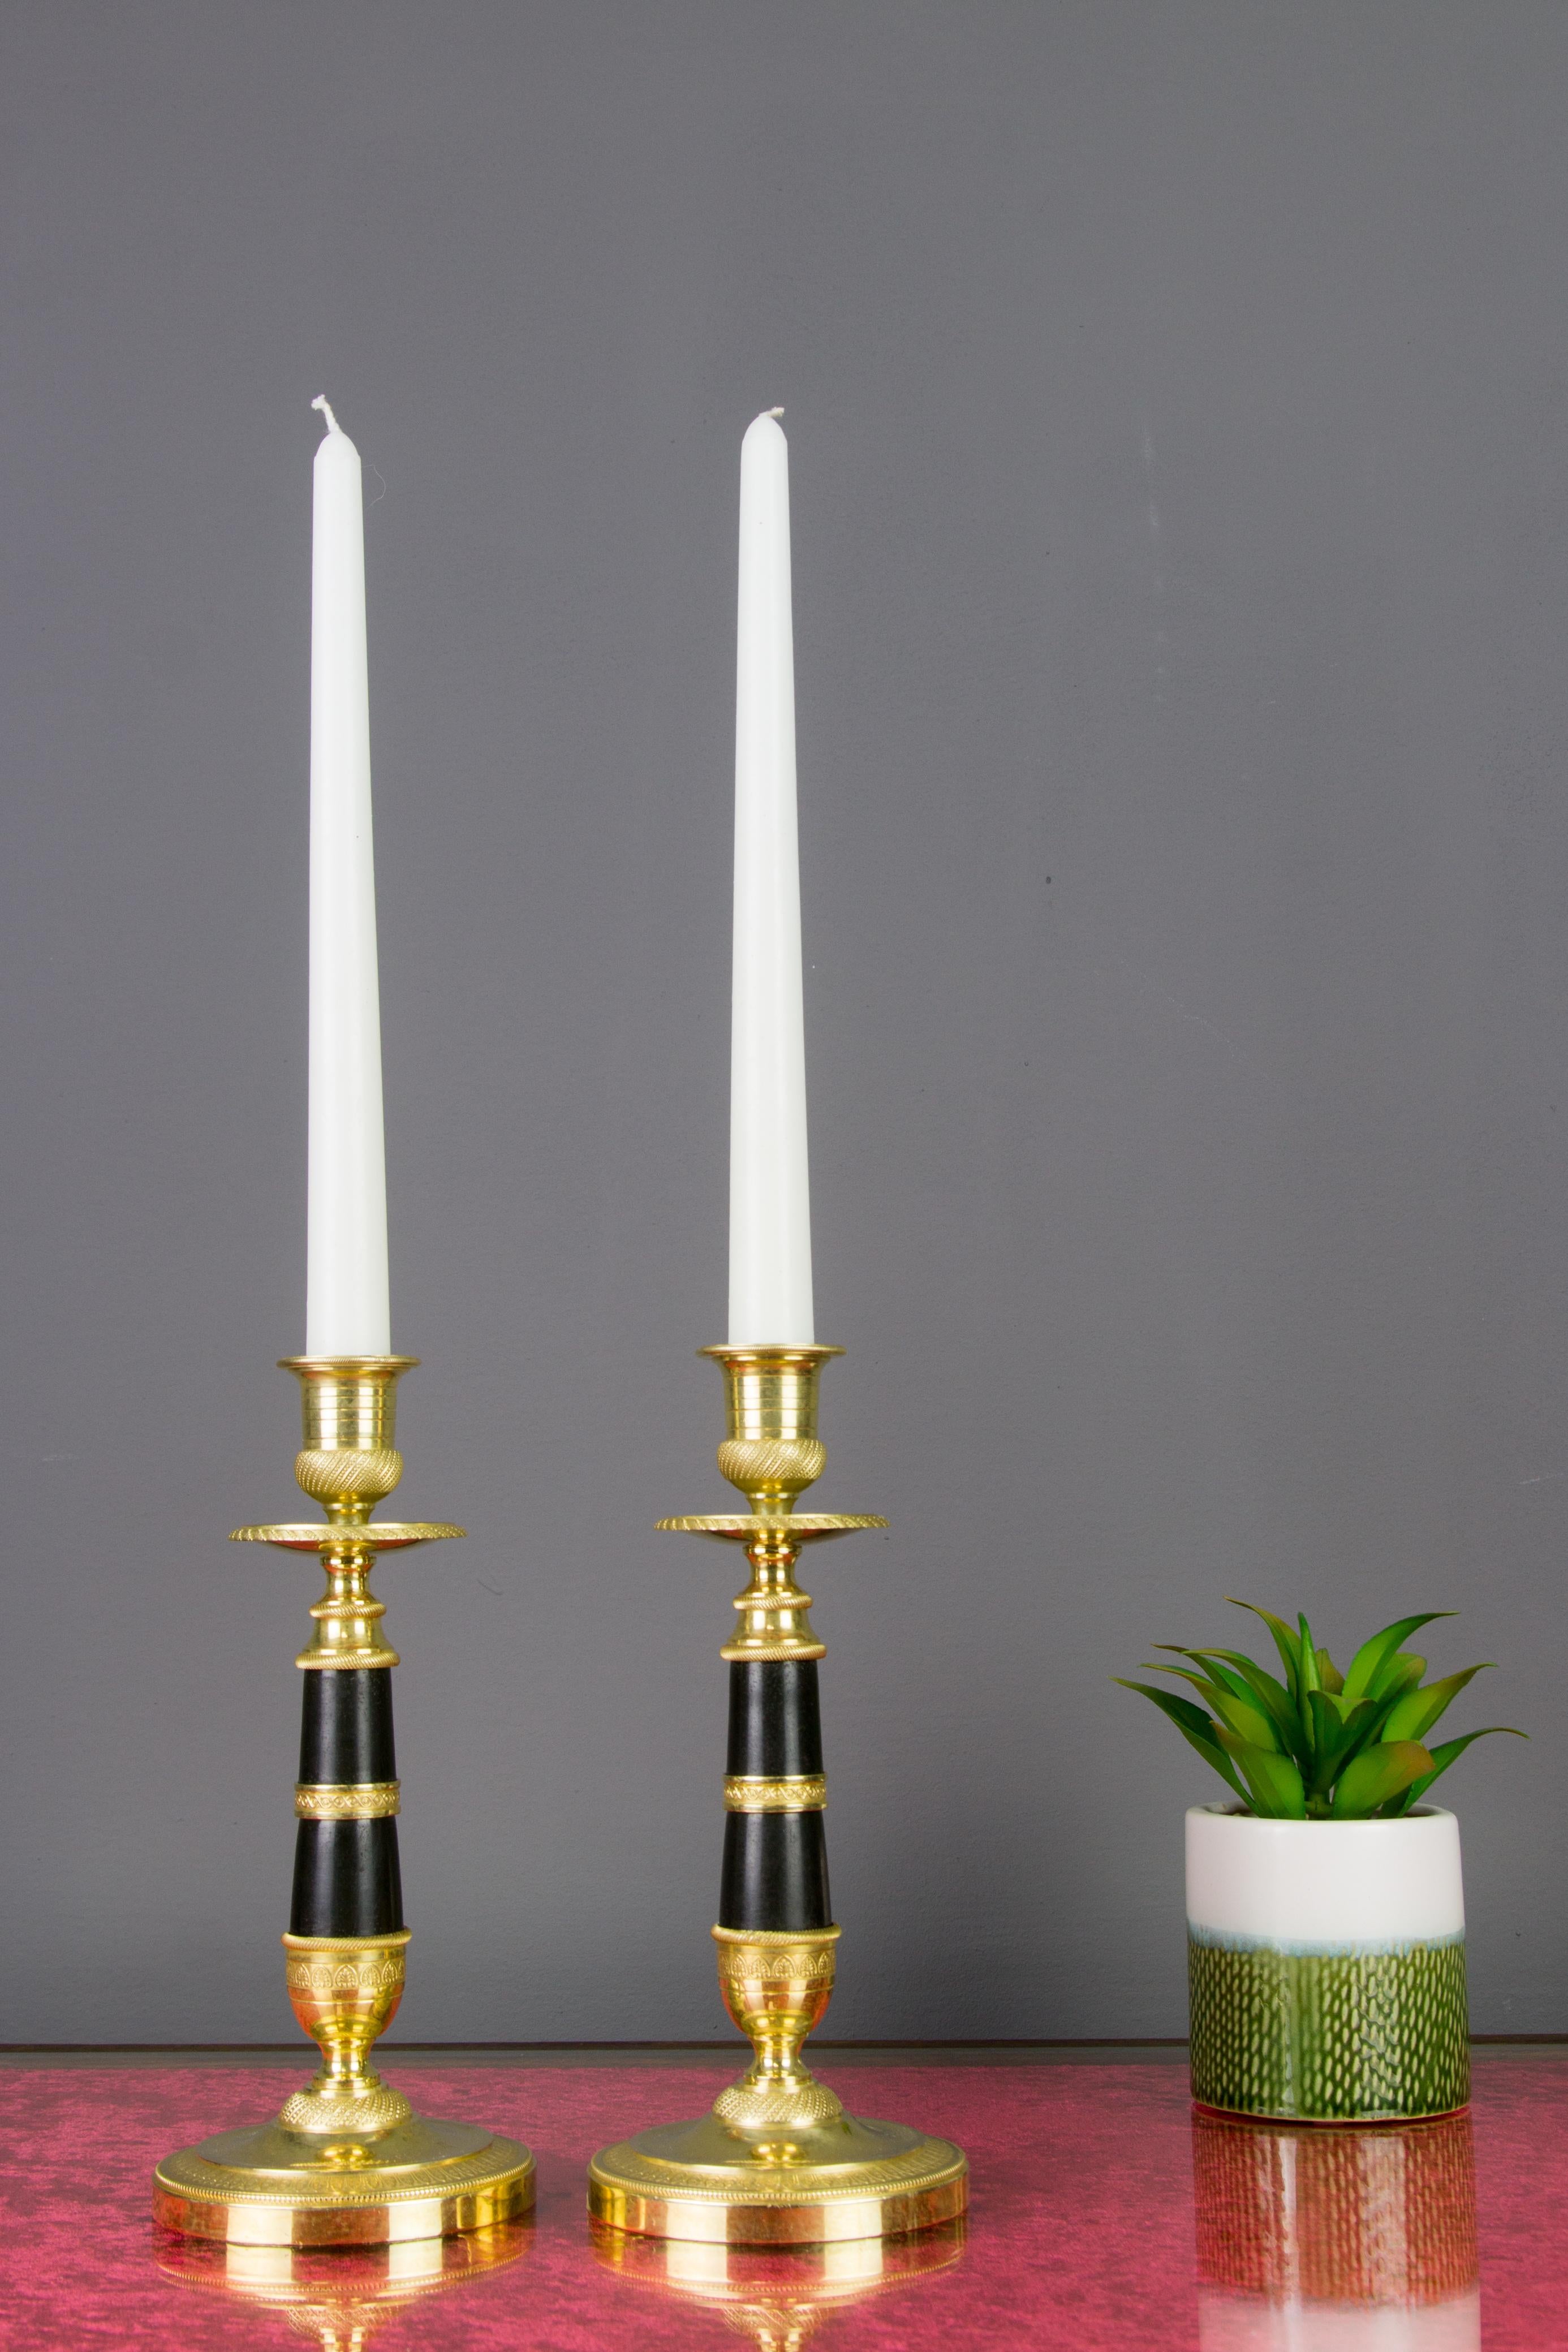 Very nice pair of French Empire style gold-plated, patinated and burnished bronze and brass candlesticks. Each candlestick features finely engraved decors and is raised on a round ornate base.
Dimensions: height 20.5 cm / 10.43 in, diameter of the